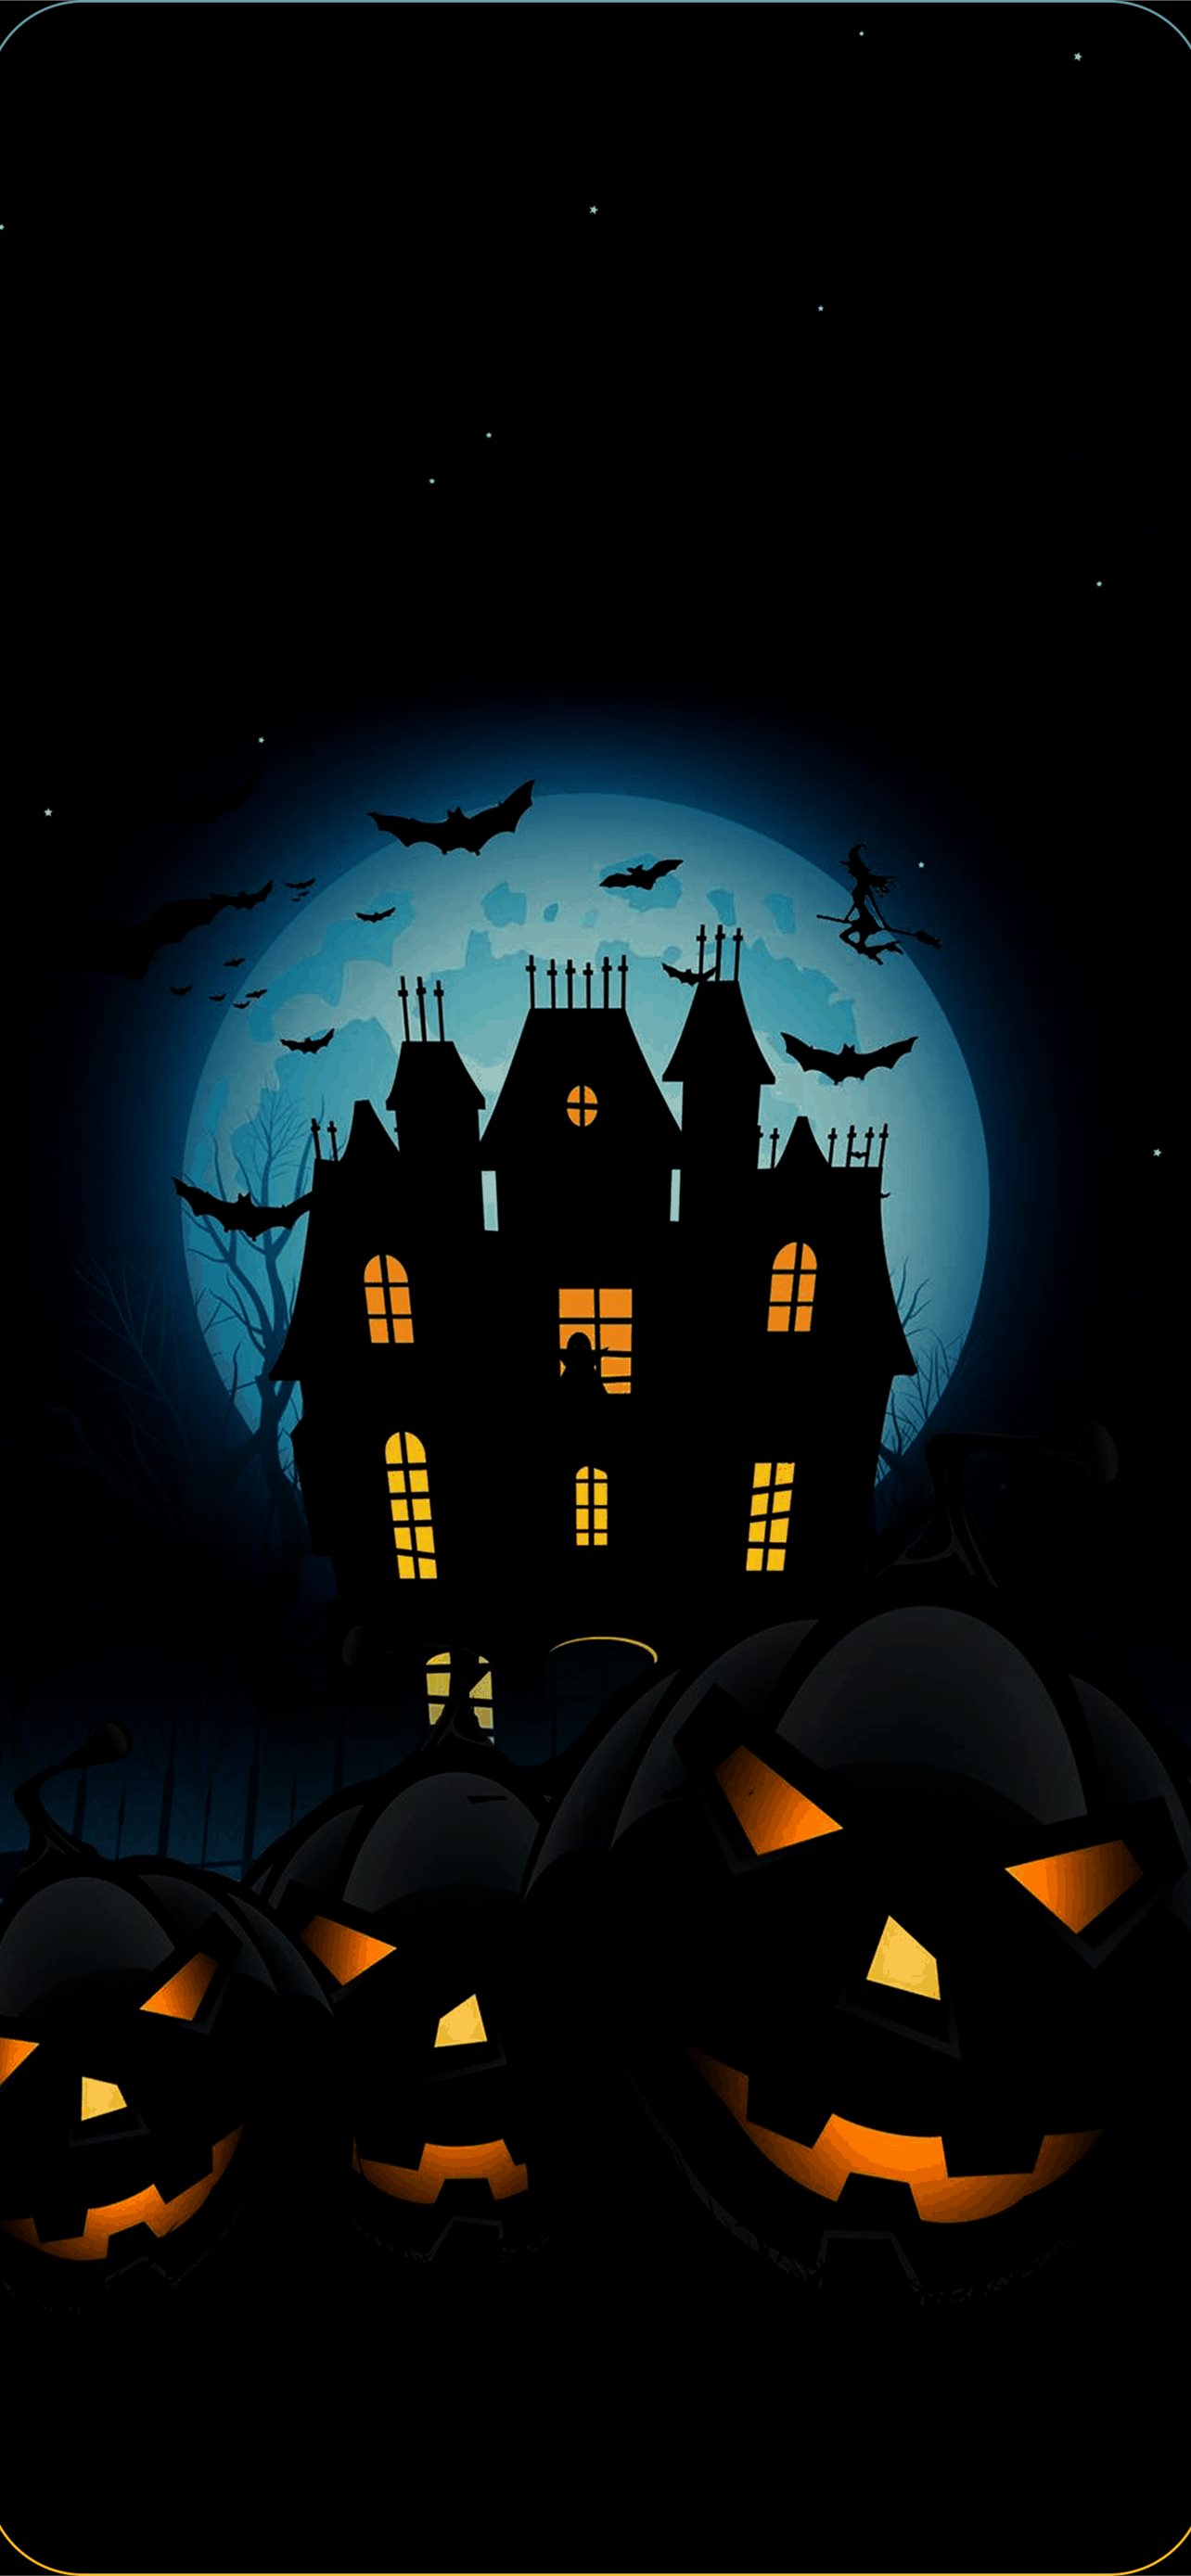 Halloween Wallpaper For Android Free Download  Halloween wallpaper  backgrounds Halloween wallpaper iphone Halloween backgrounds